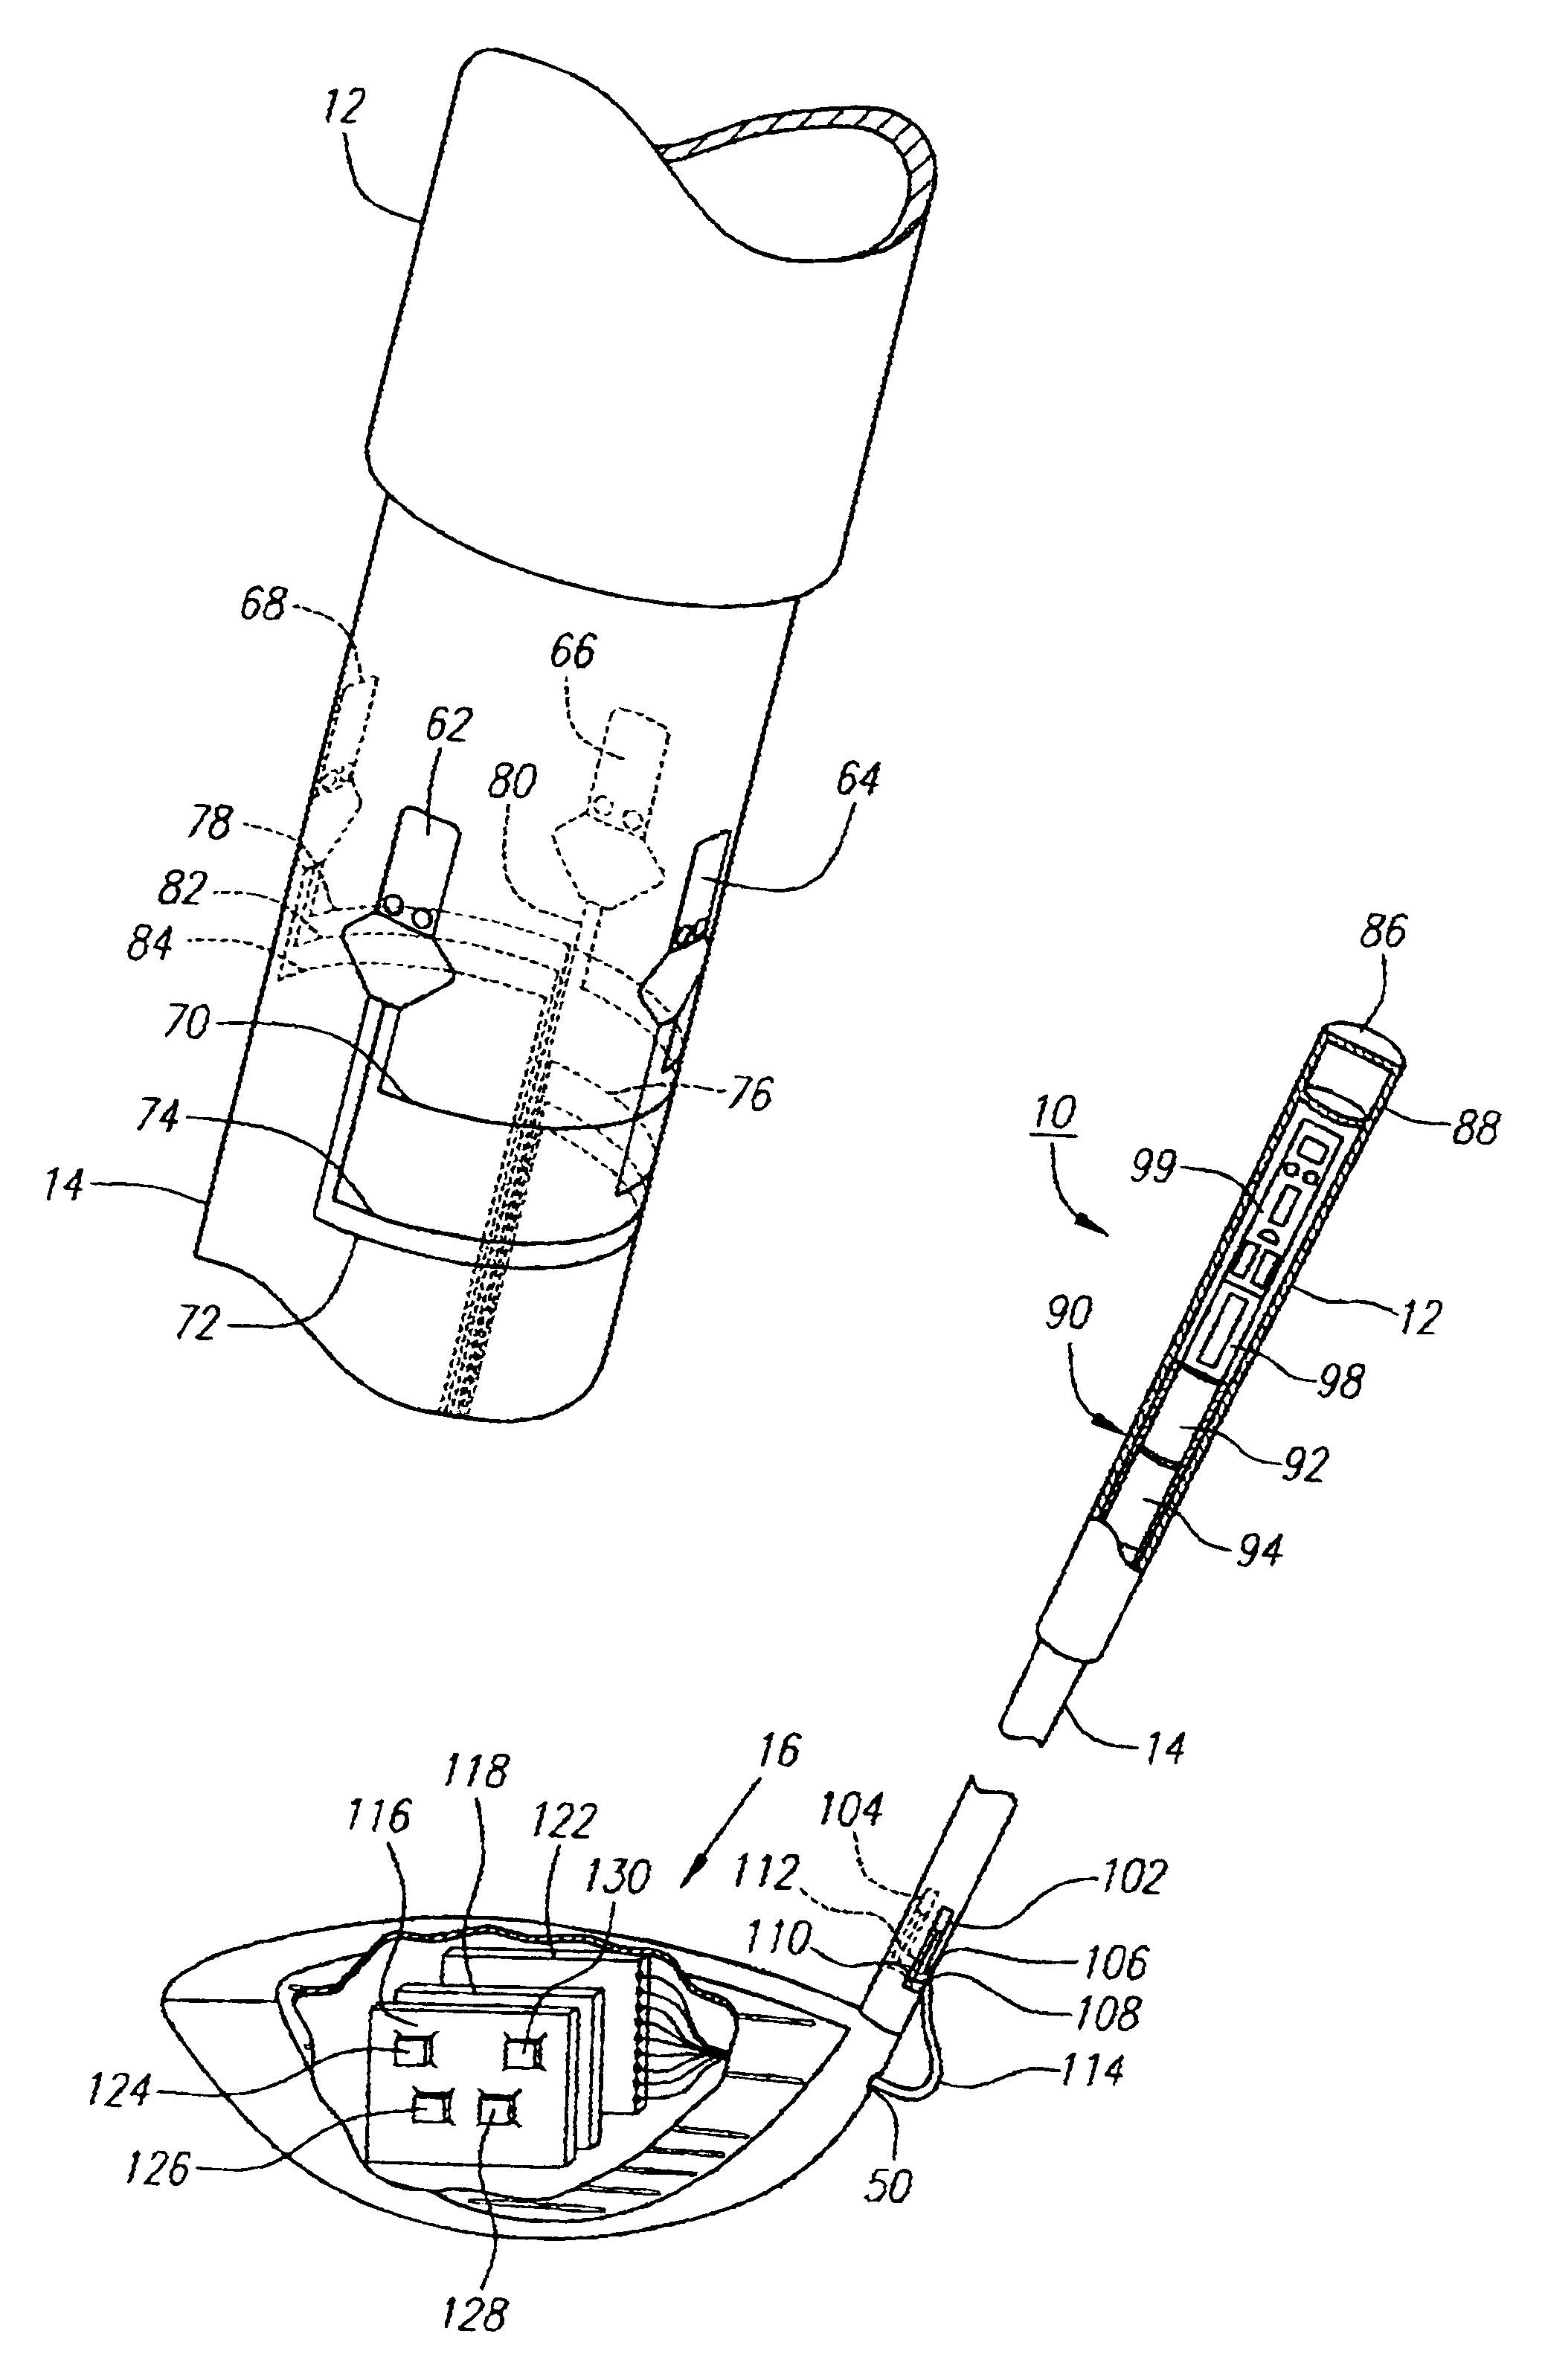 Instrumented golf club system & method of use